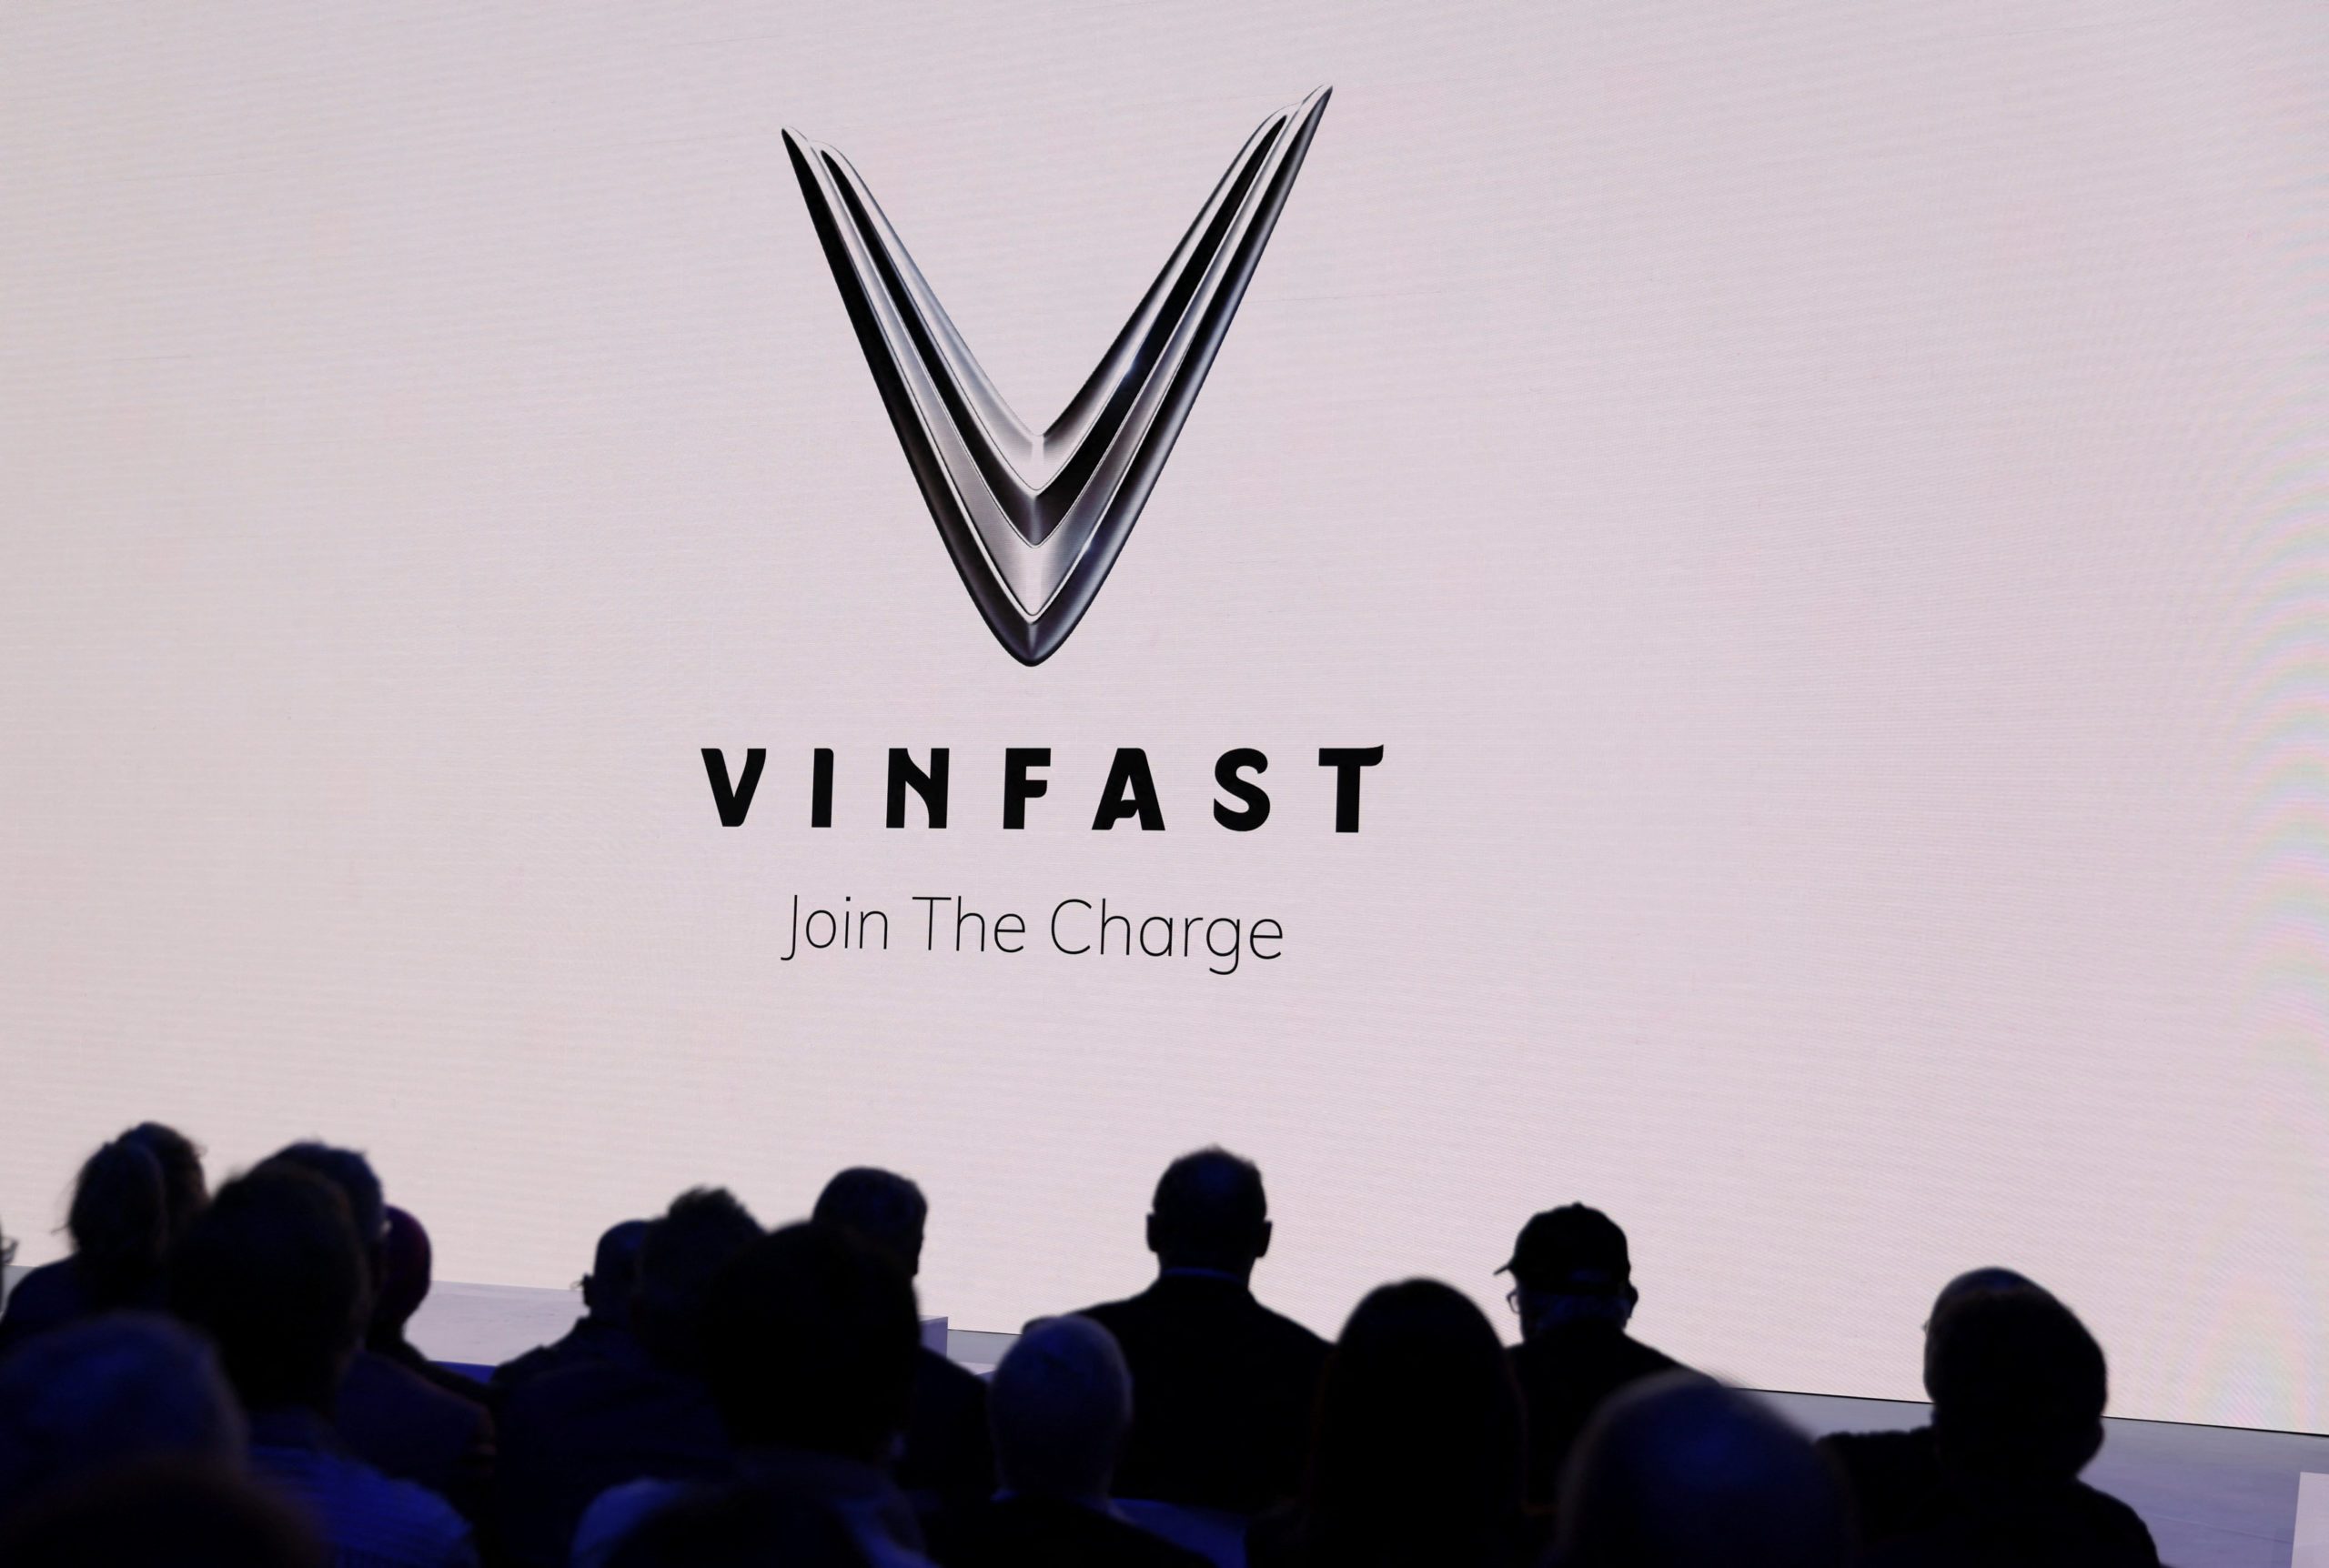 EV startup Vinfast to cut US jobs amid restructuring